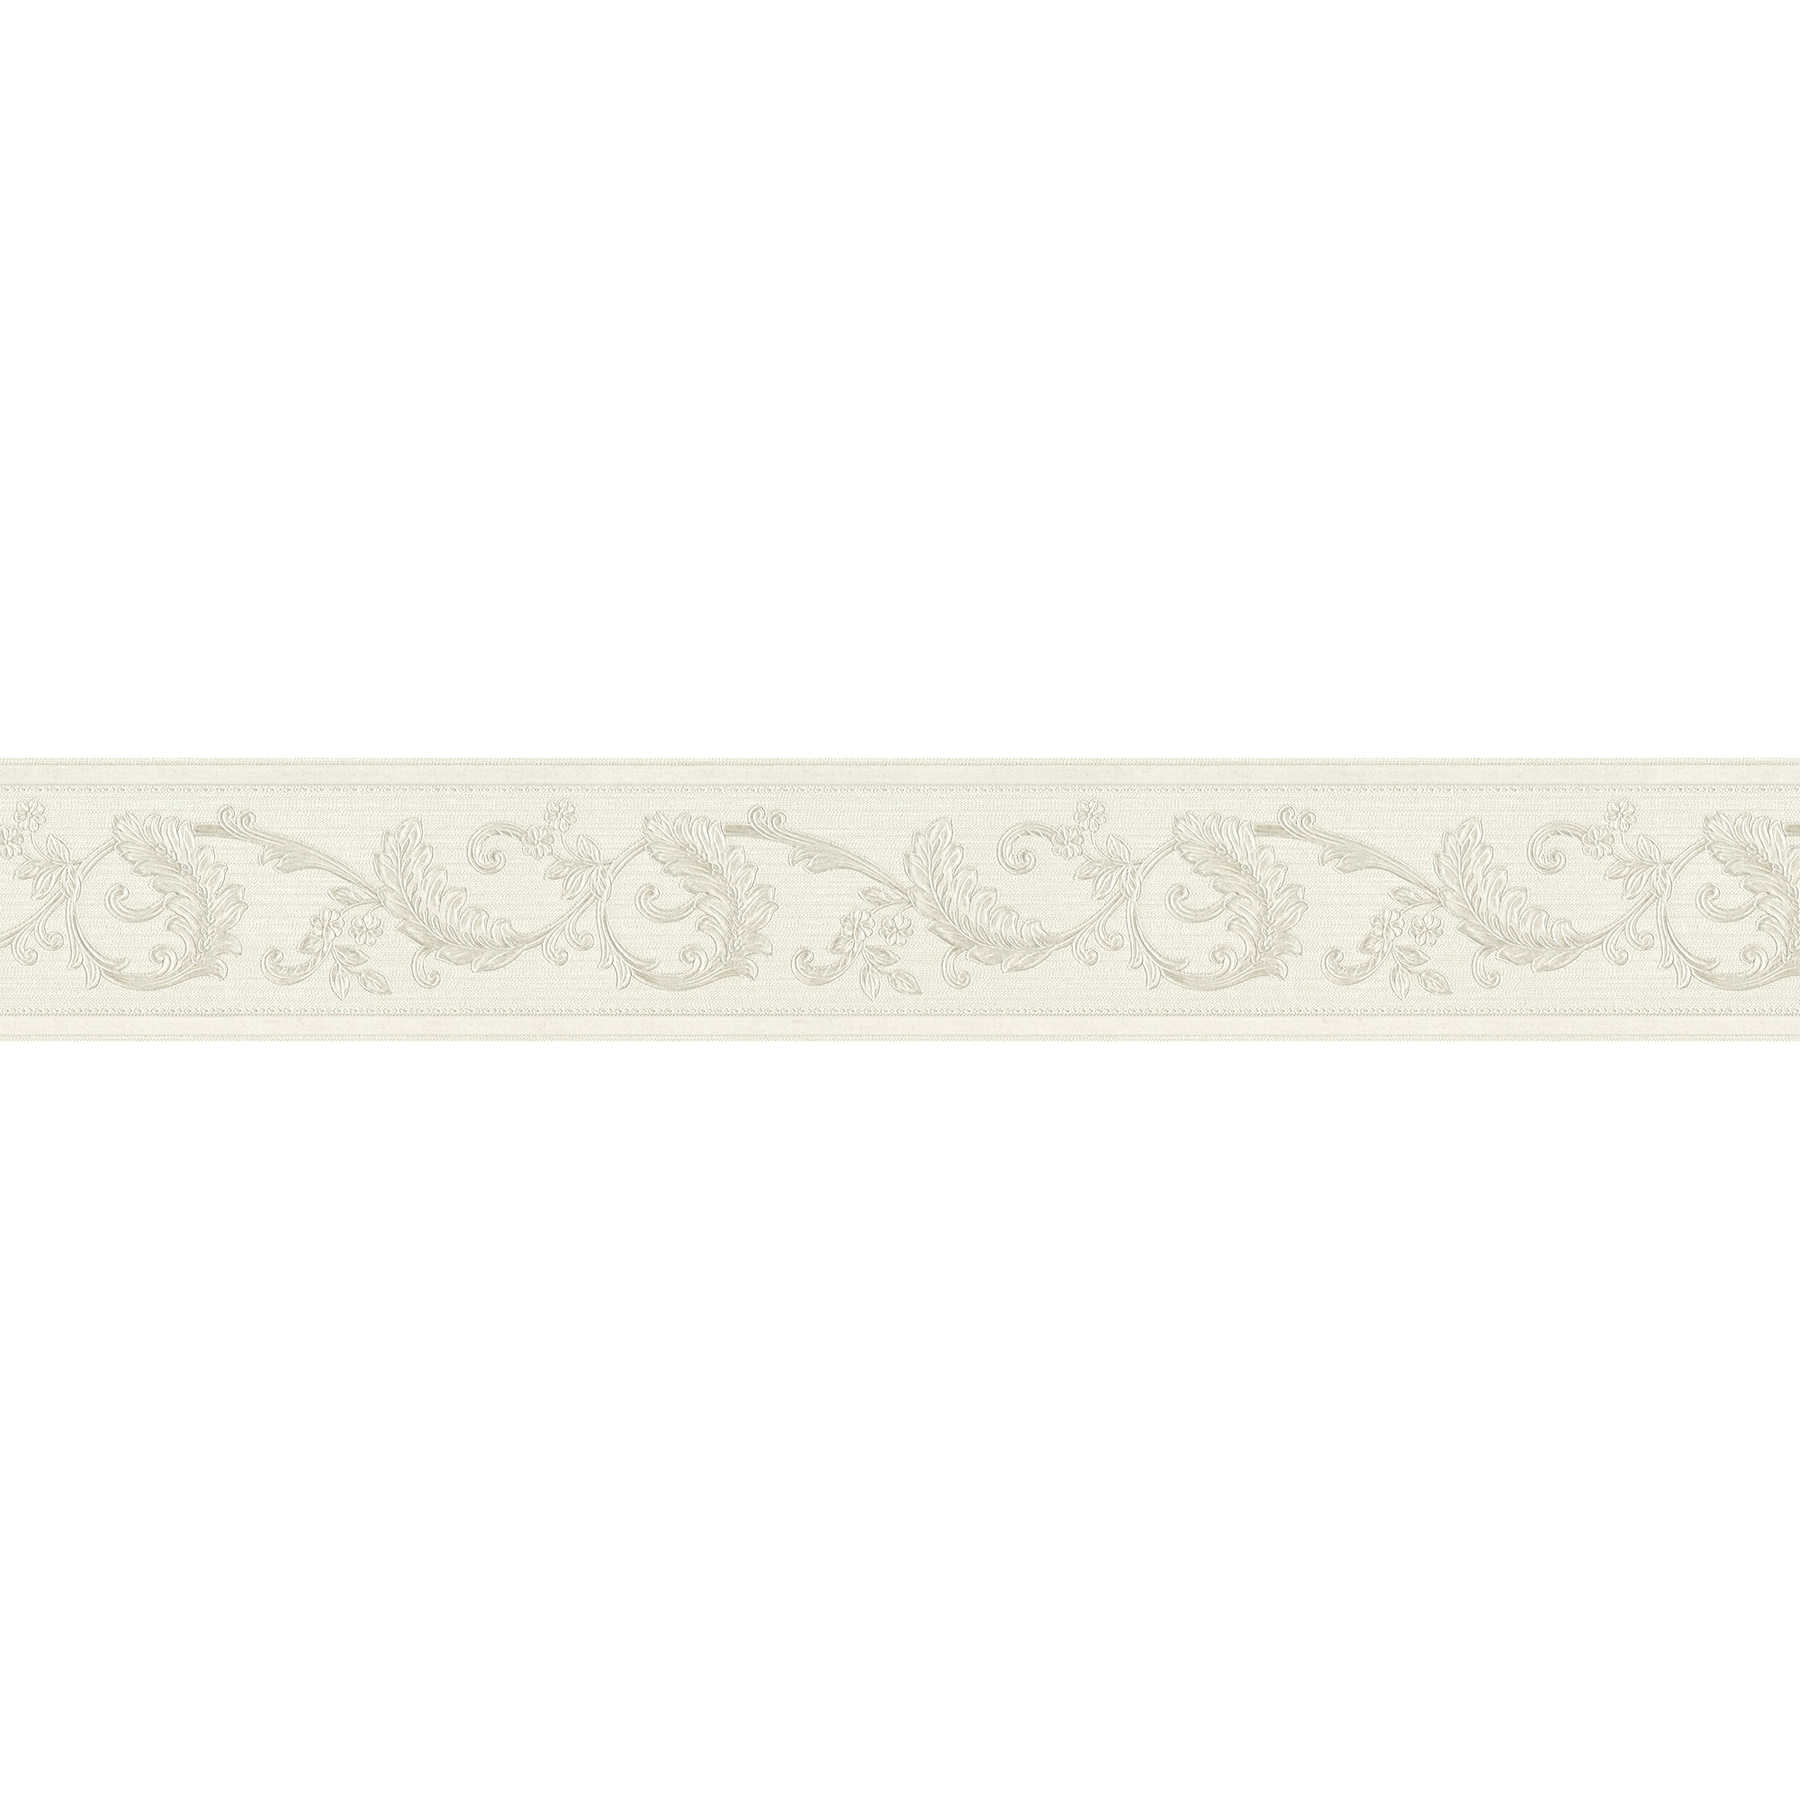         Wallpaper border with metallic vines in ornament style
    